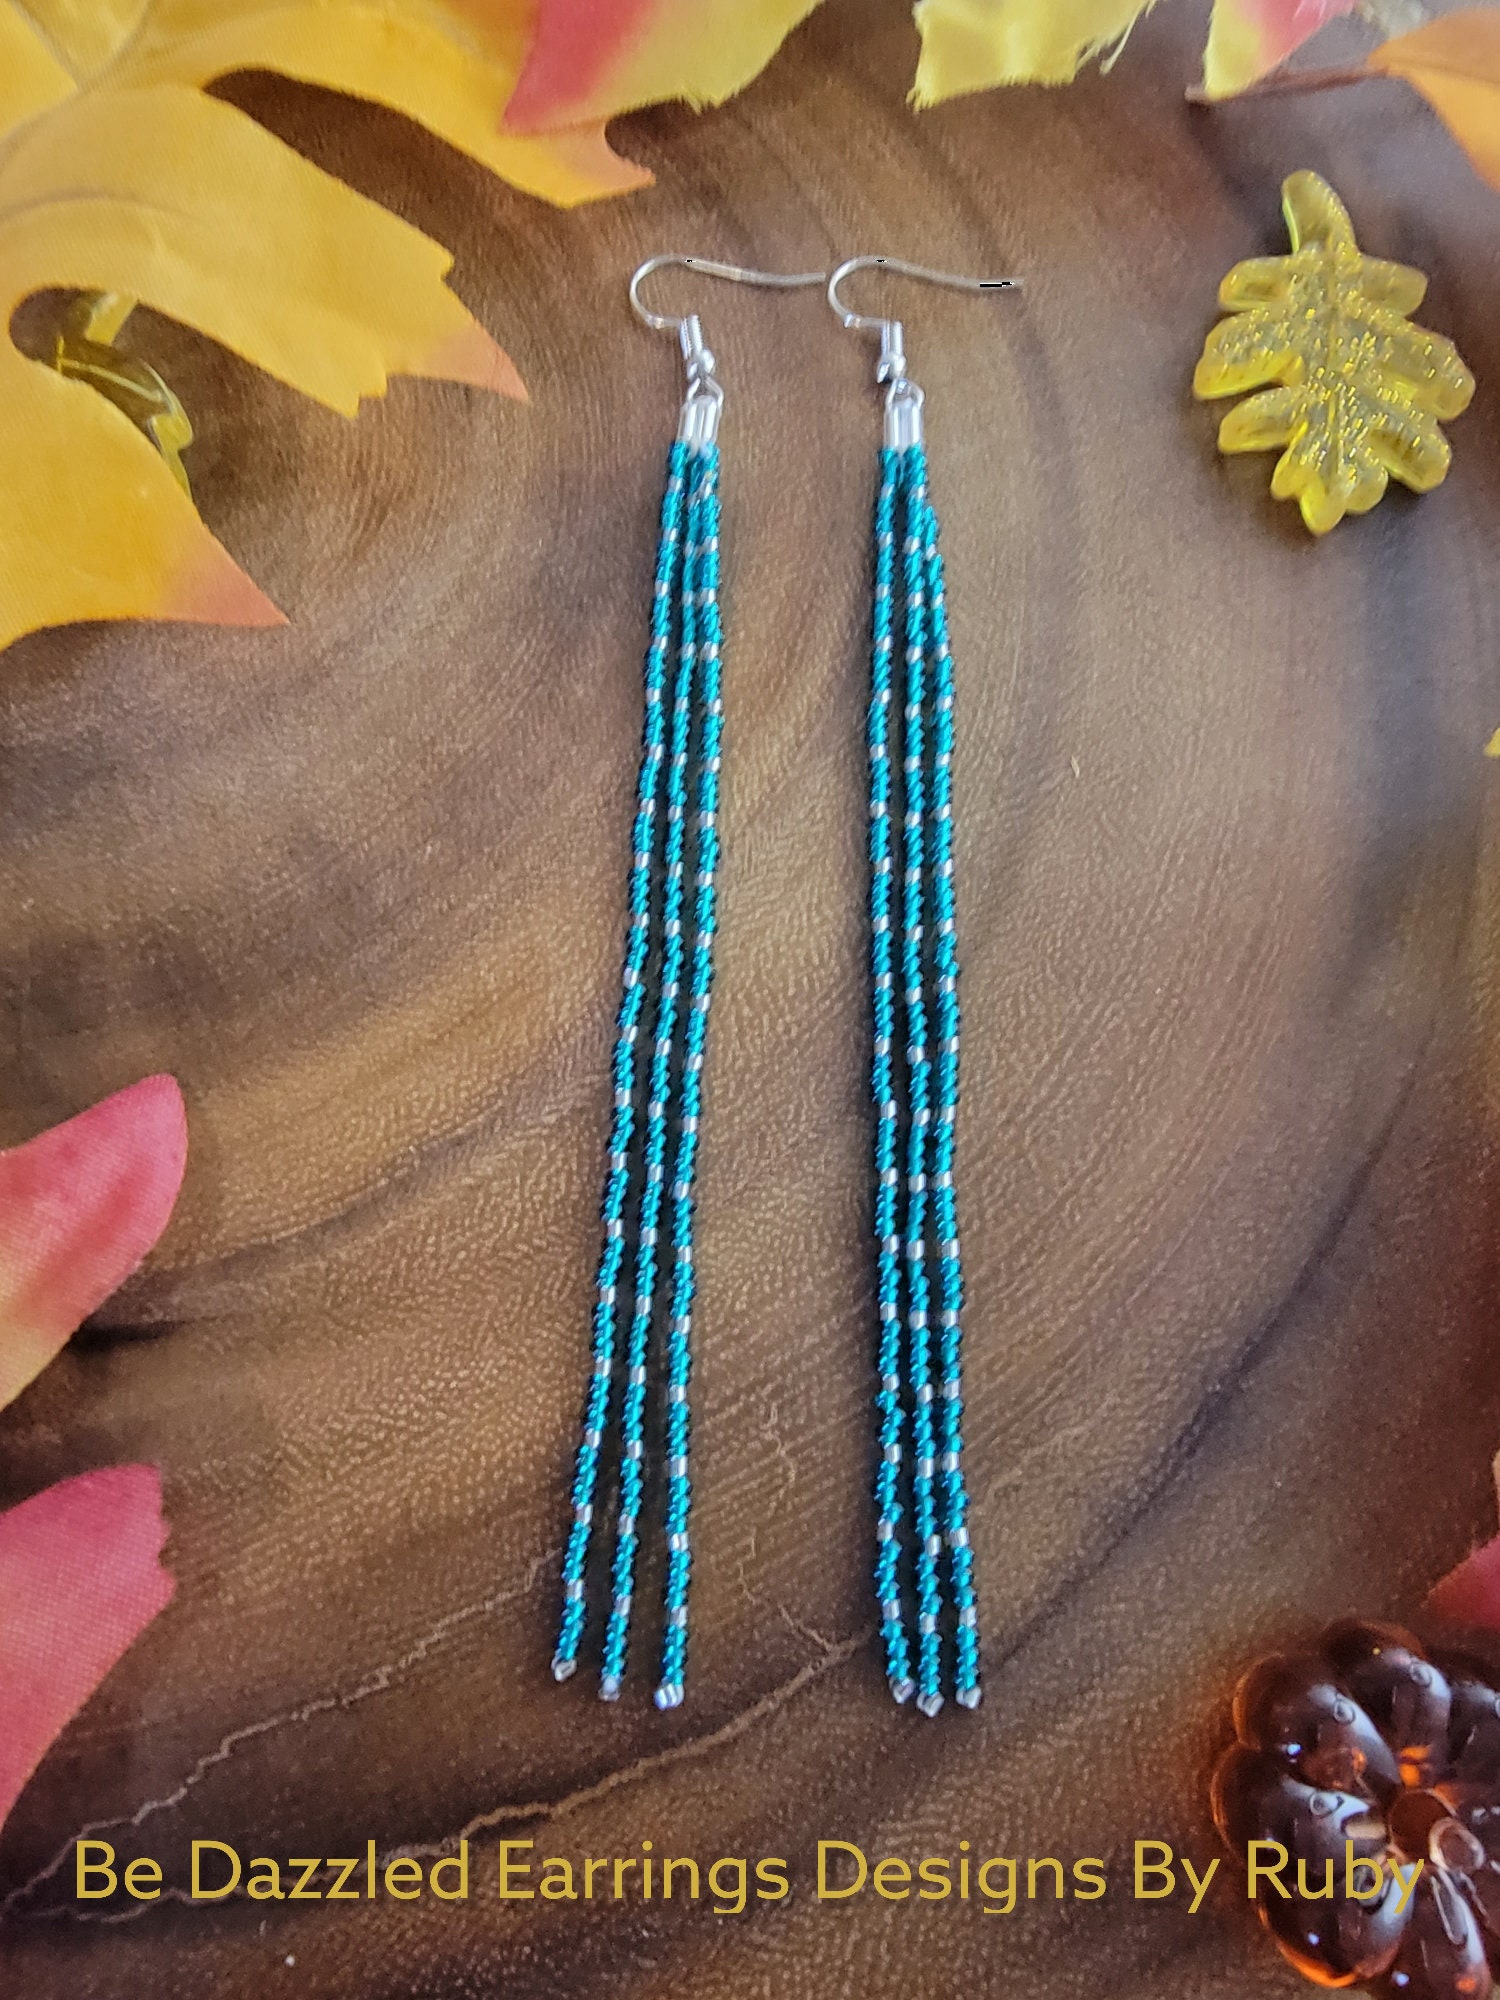 Native American Style Seed Bead Earrings HandMade with Native Colors and  Design | eBay